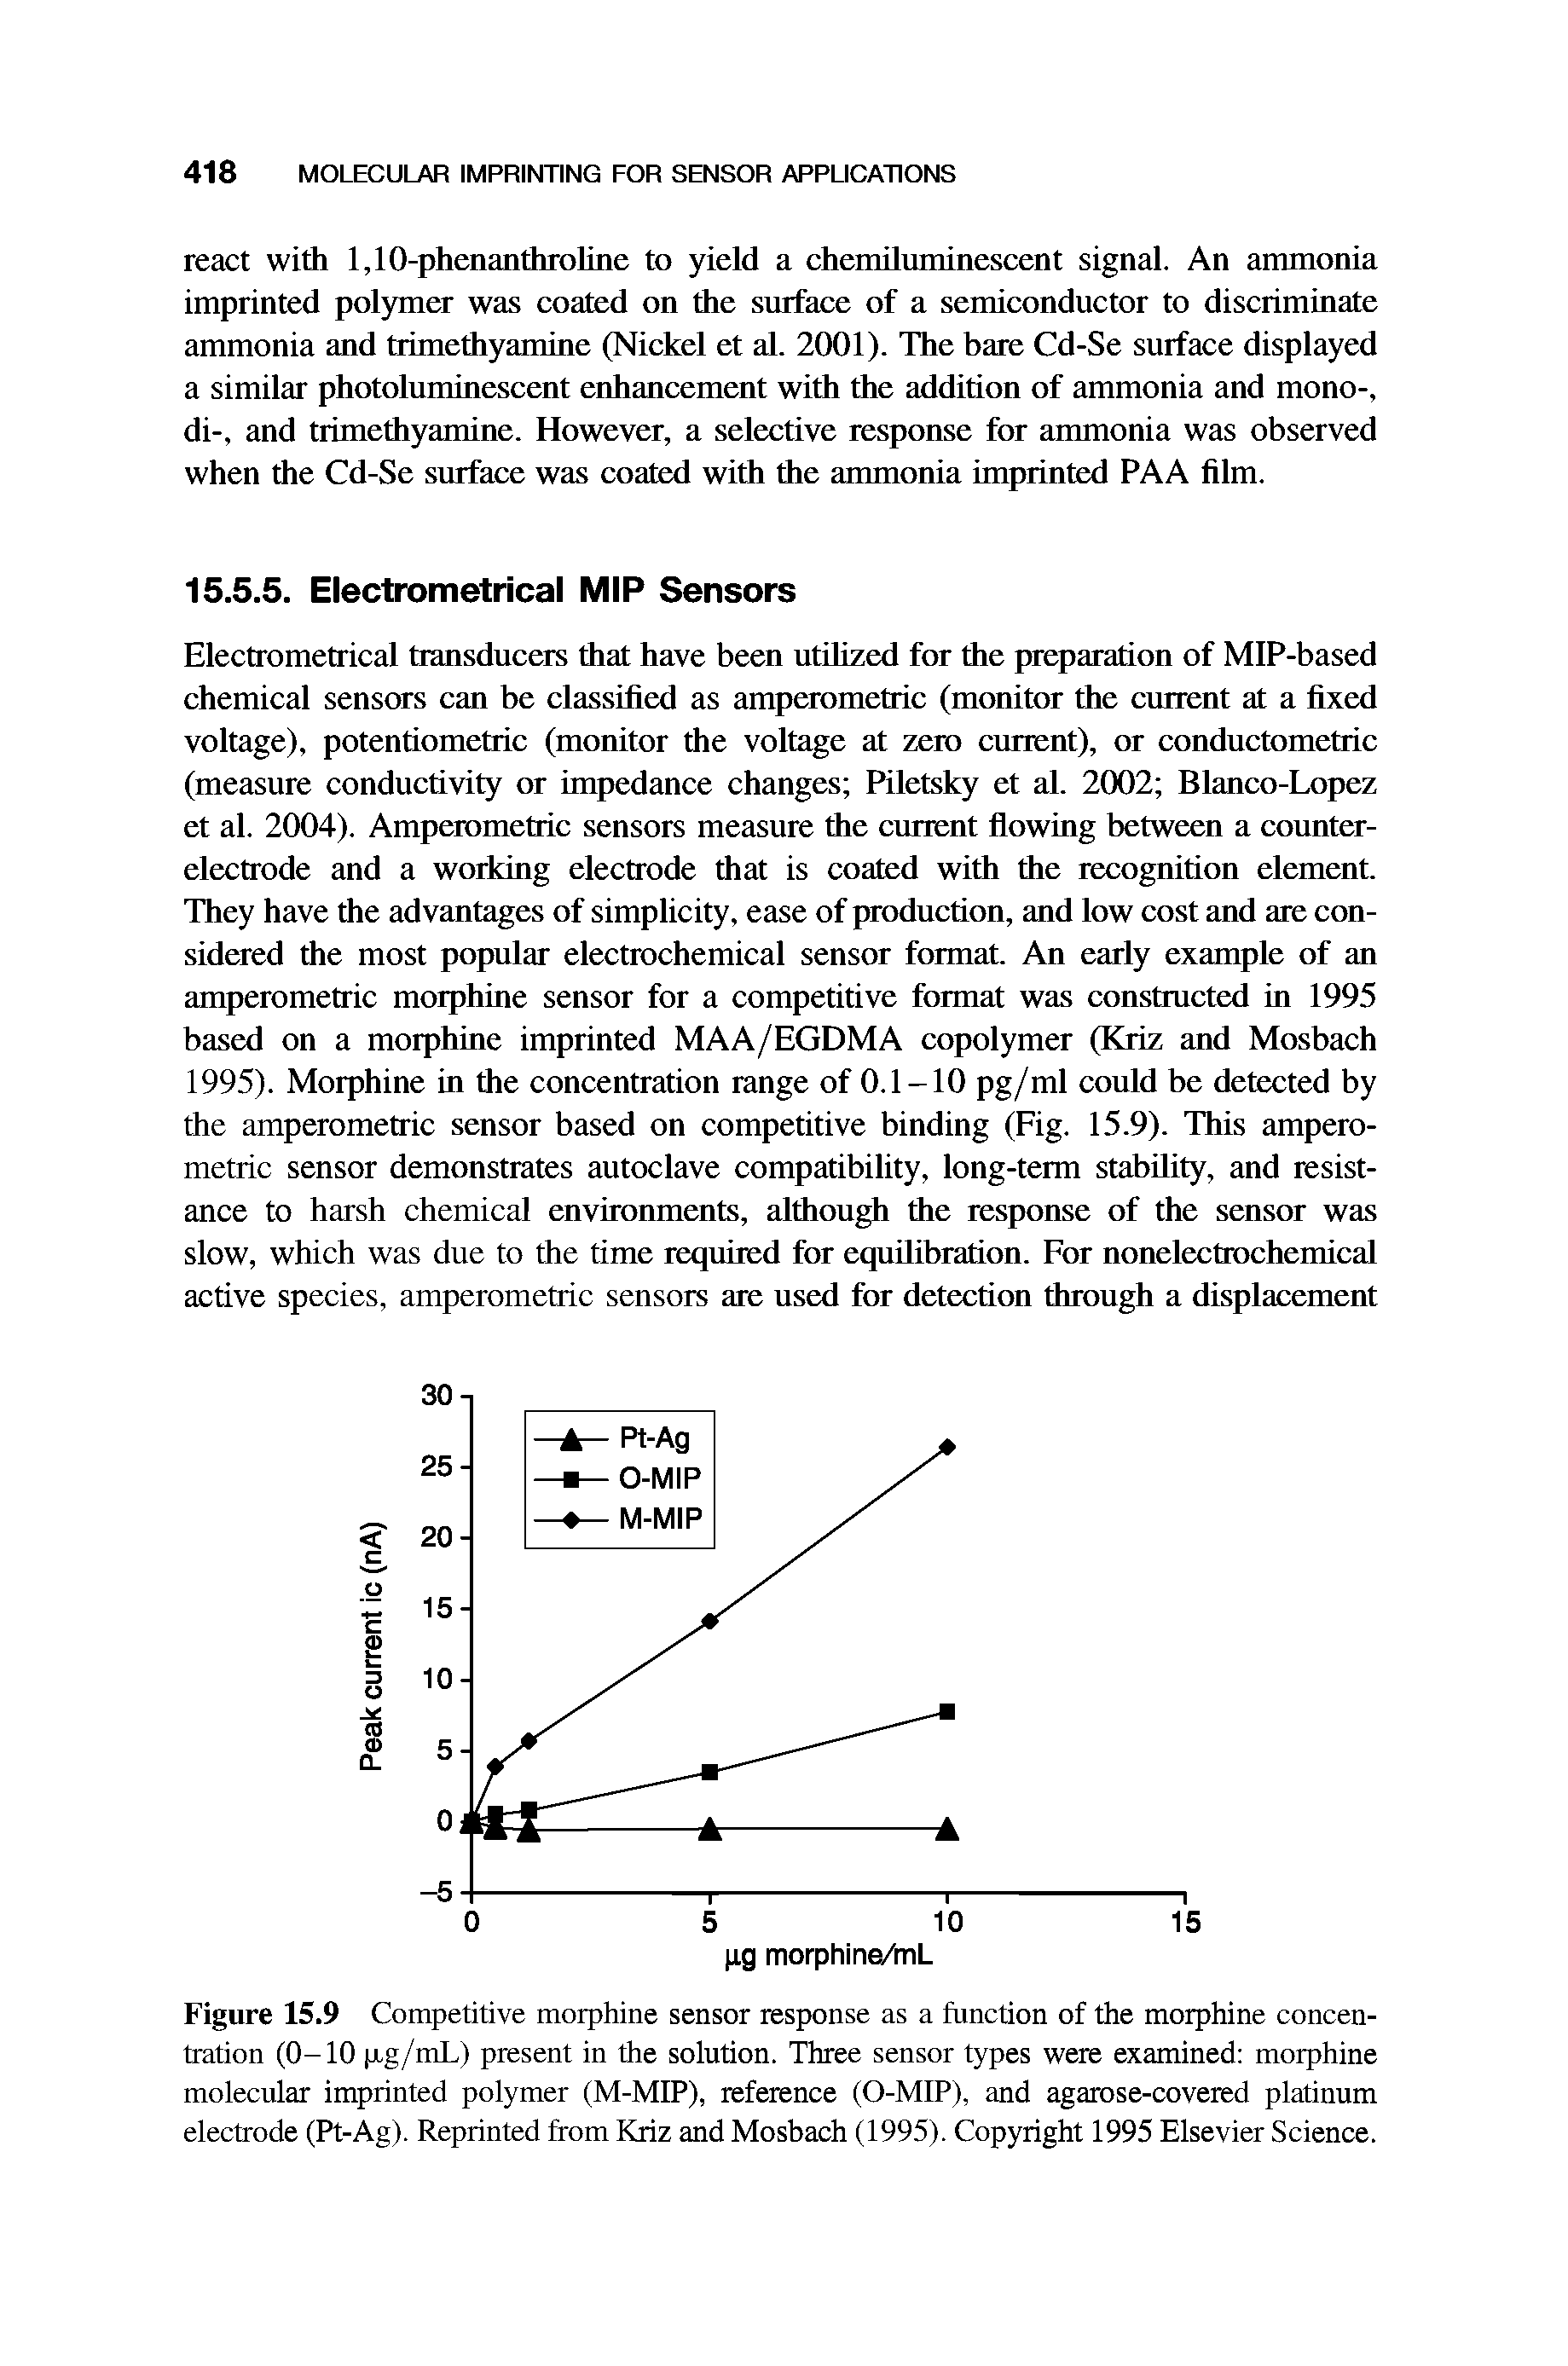 Figure 15.9 Competitive morphine sensor response as a function of the morphine concentration (0-10 p-g/mL) present in the solution. Three sensor types were examined morphine molecular imprinted polymer (M-MIP), reference (O-MIP), and agarose-covered platinum electrode (Pt-Ag). Reprinted from Kriz and Mosbach (1995). Copyright 1995 Elsevier Science.